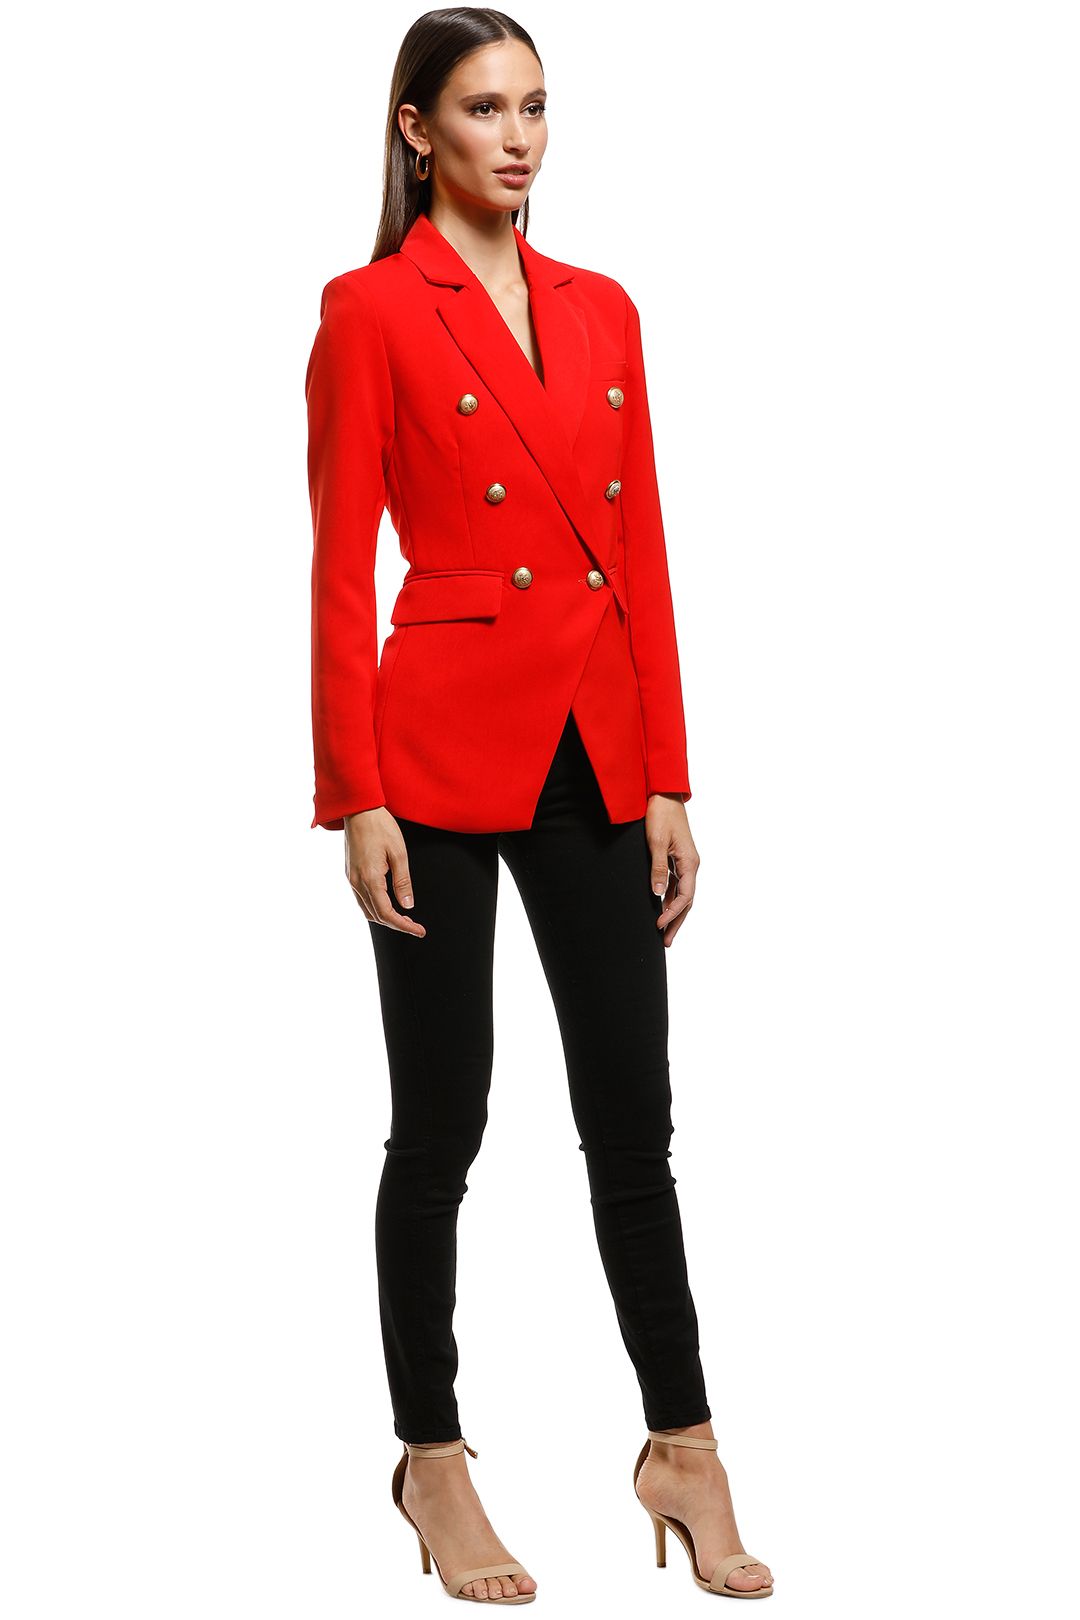 Wish - Expectations Blazer - Red - Side